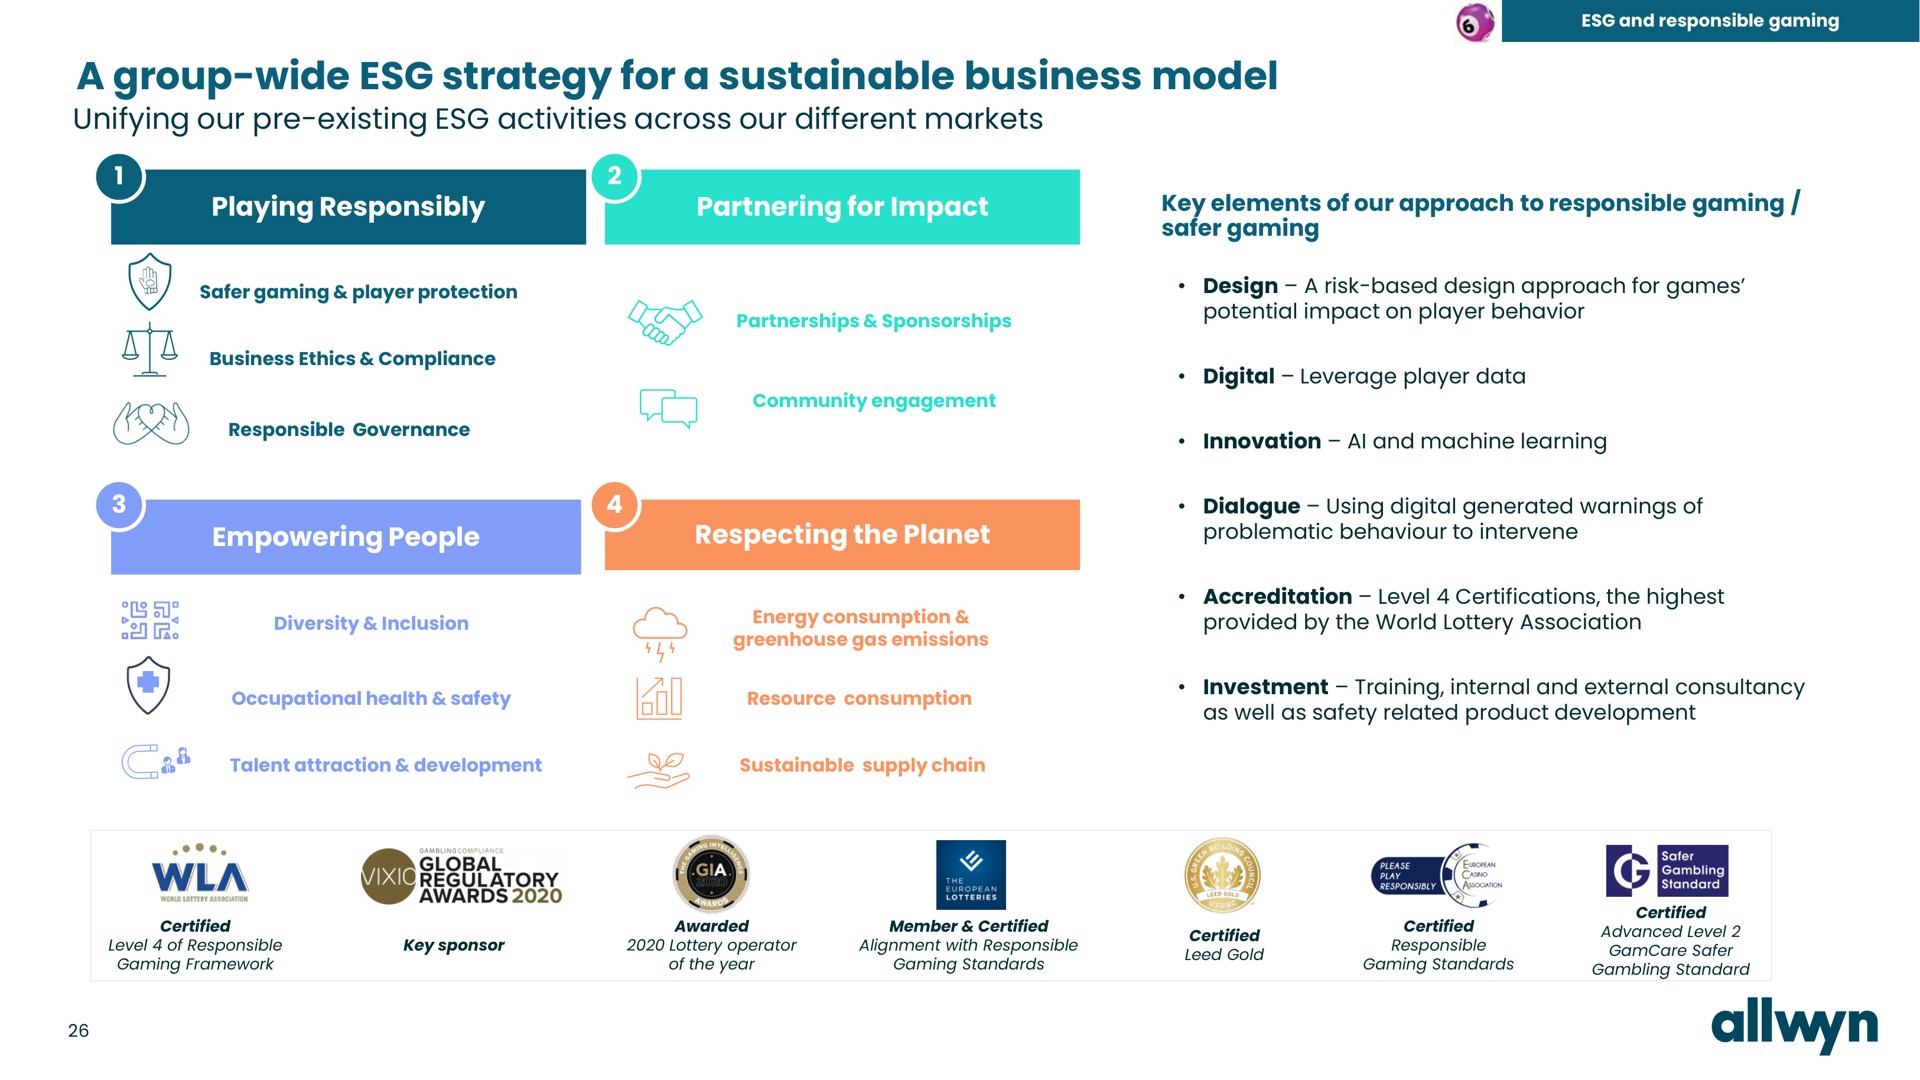 a group wide strategy for a sustainable business model | Allwyn